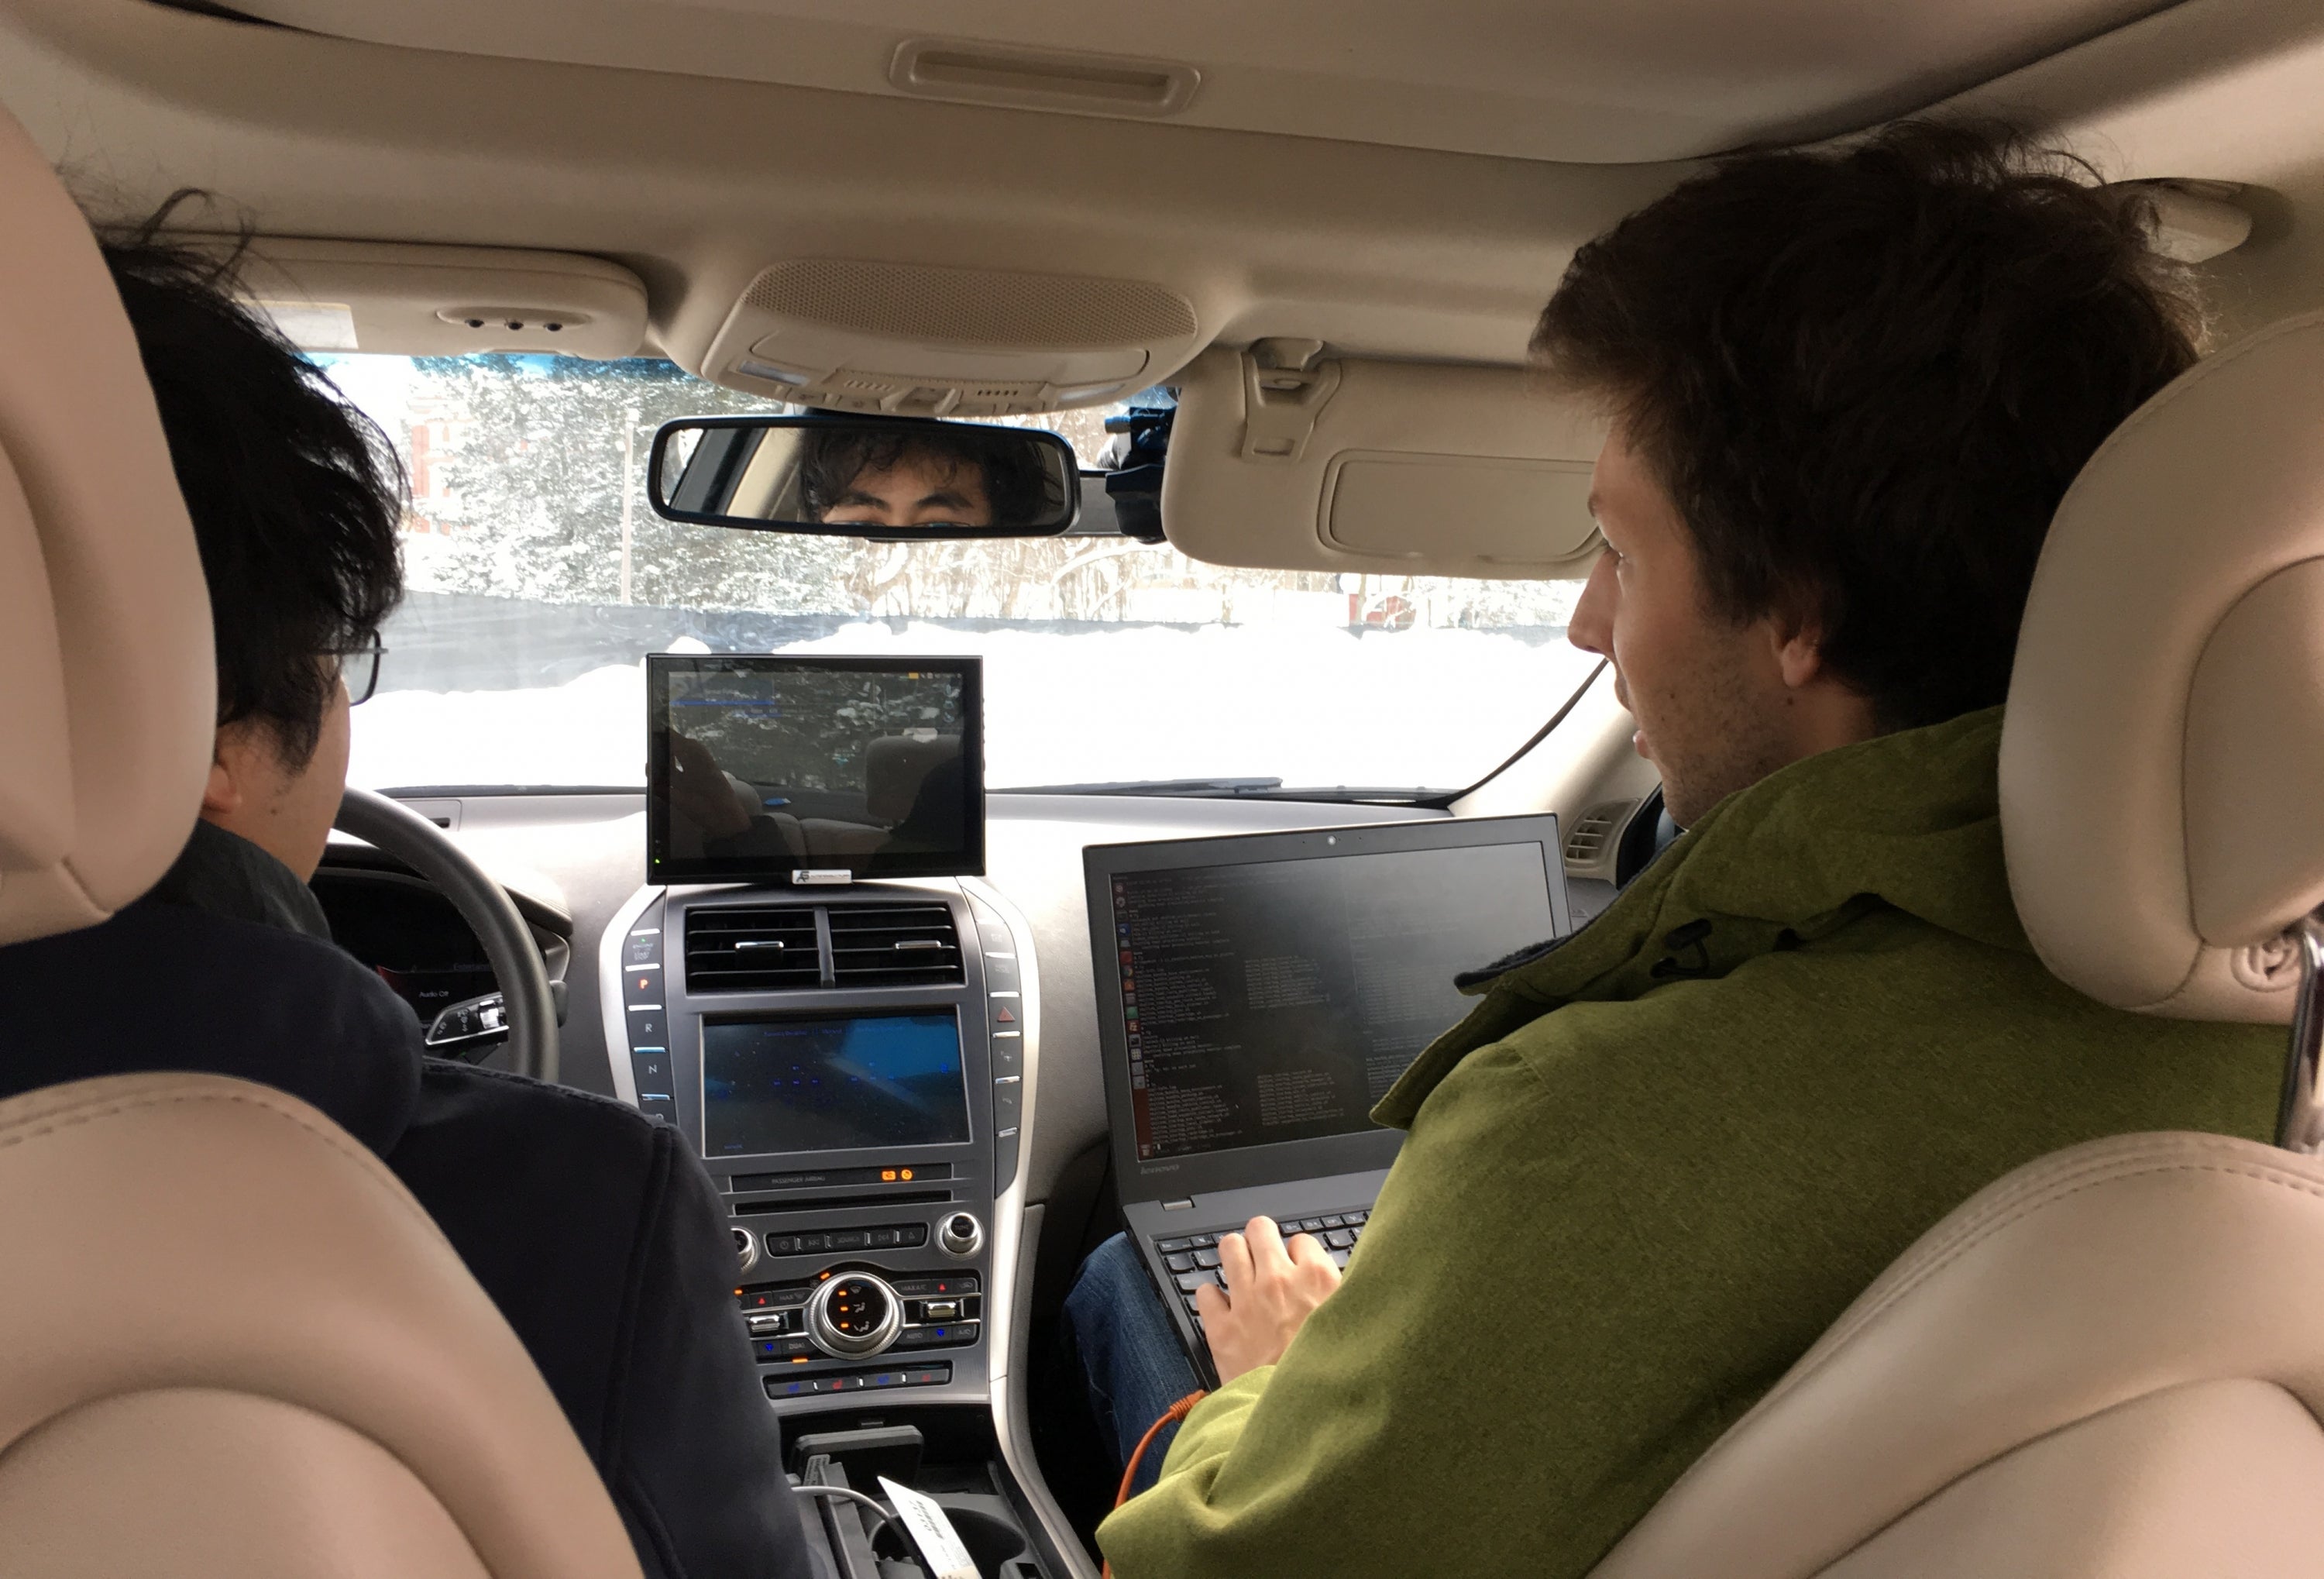 Graduate student researchers Carlos Wang (left) and Ian Colwell track operation of the Renesas sedan during testing in Stratford last month in winter driving conditions.